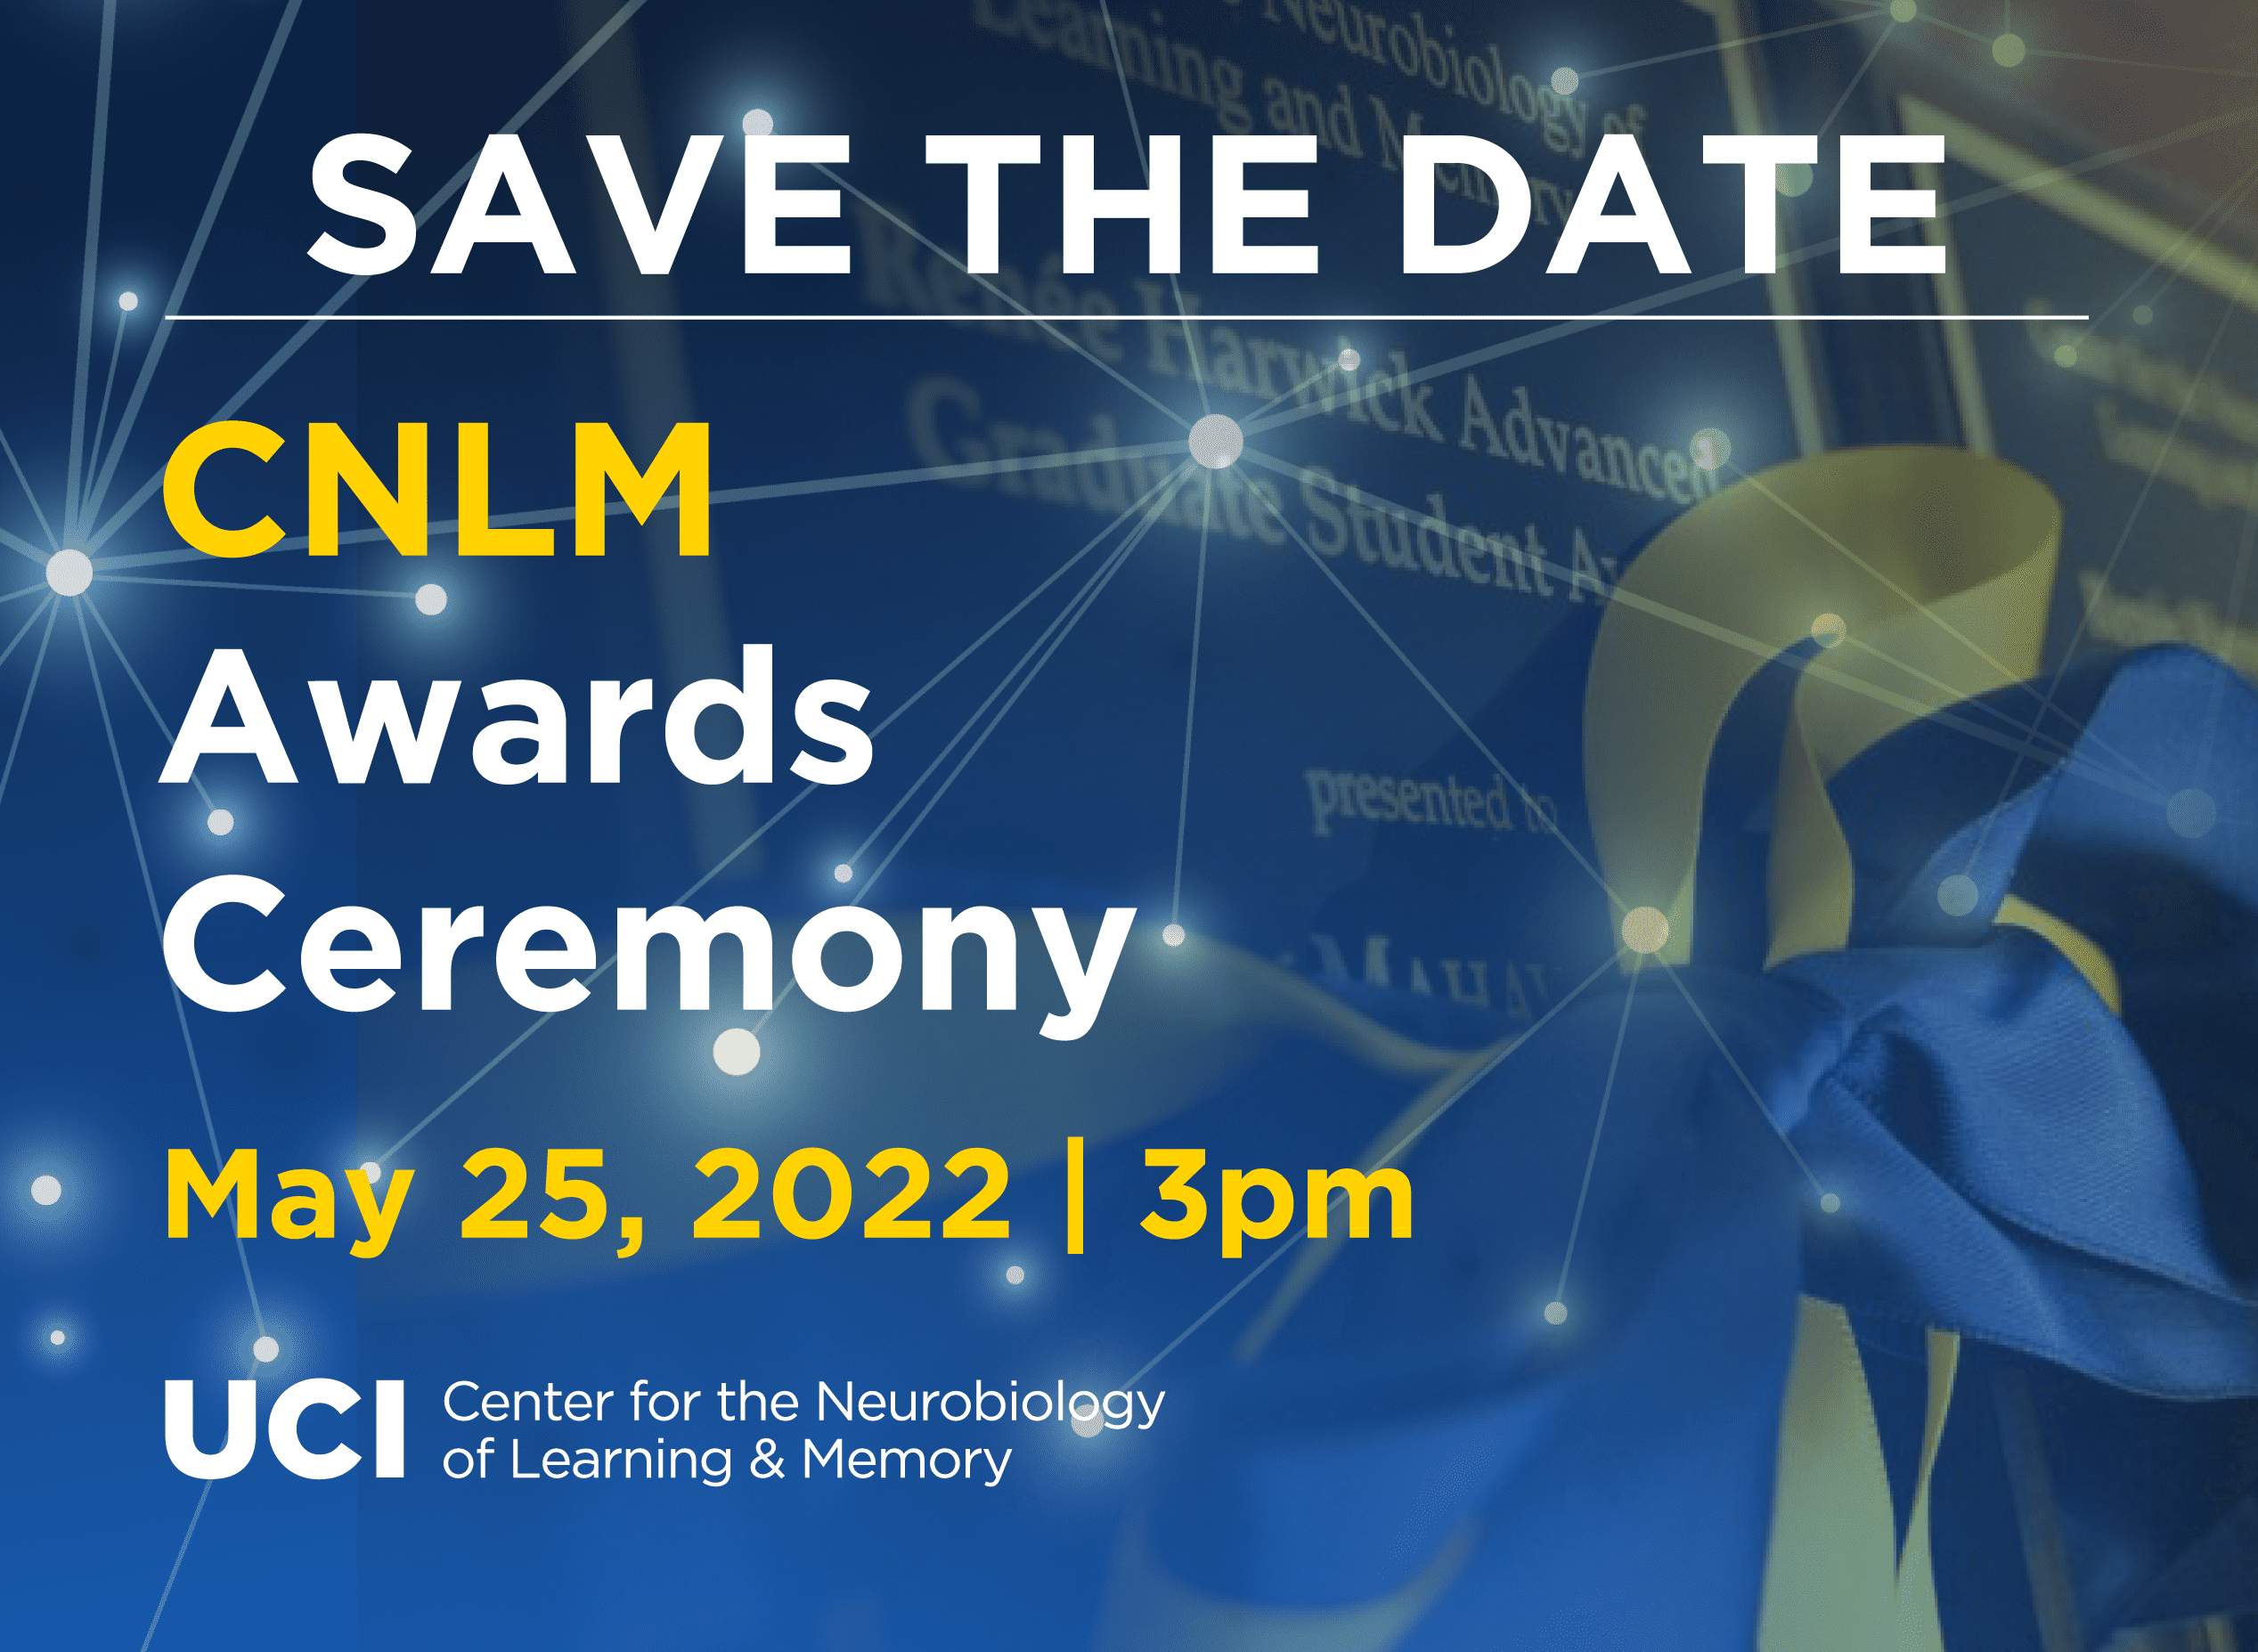 Save the Date: CNLM Awards Ceremony